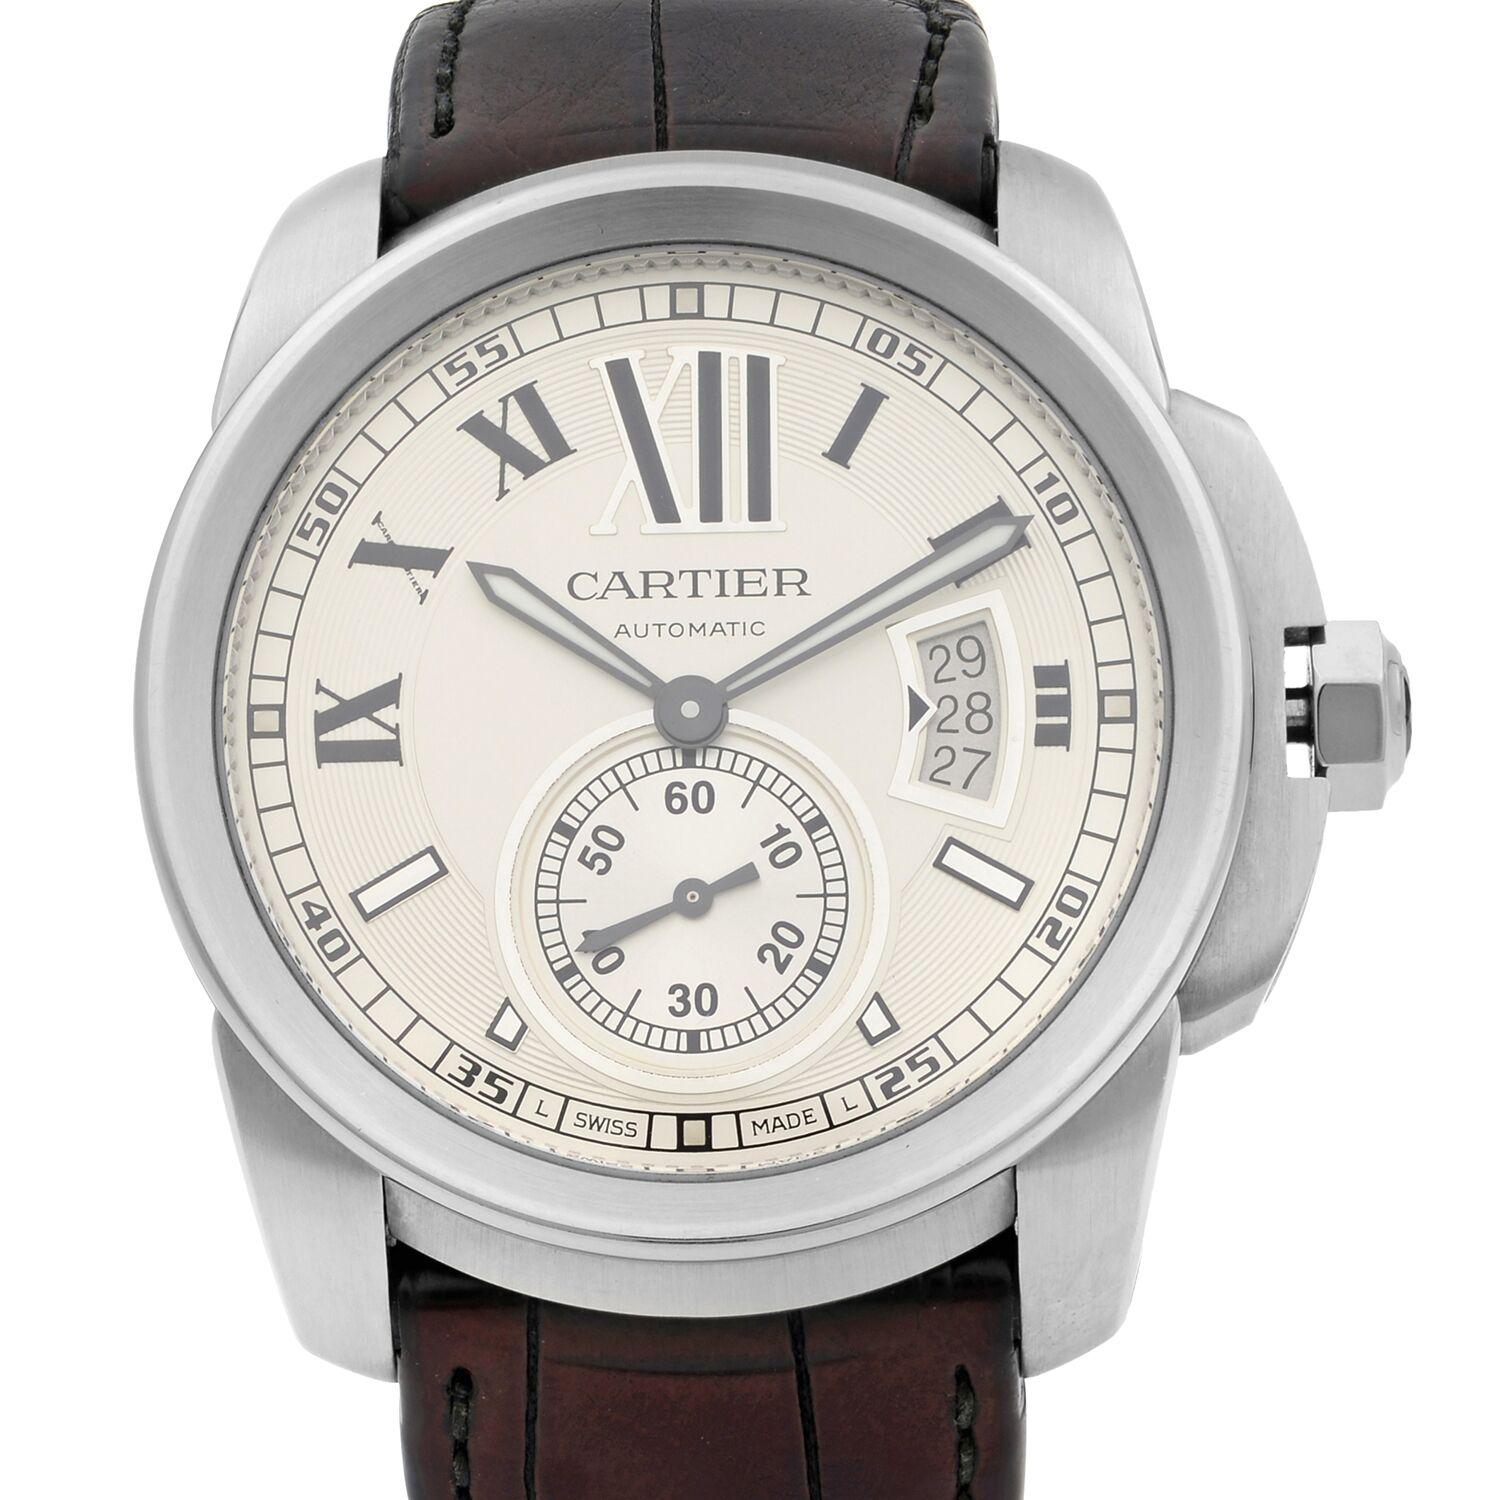 This pre-owned Cartier Calibre De Cartier W7100037 is a beautiful men's timepiece that is powered by a mechanical (automatic) movement which is cased in a stainless steel case. It has a round shape face,  dial and has hand roman numerals, sticks